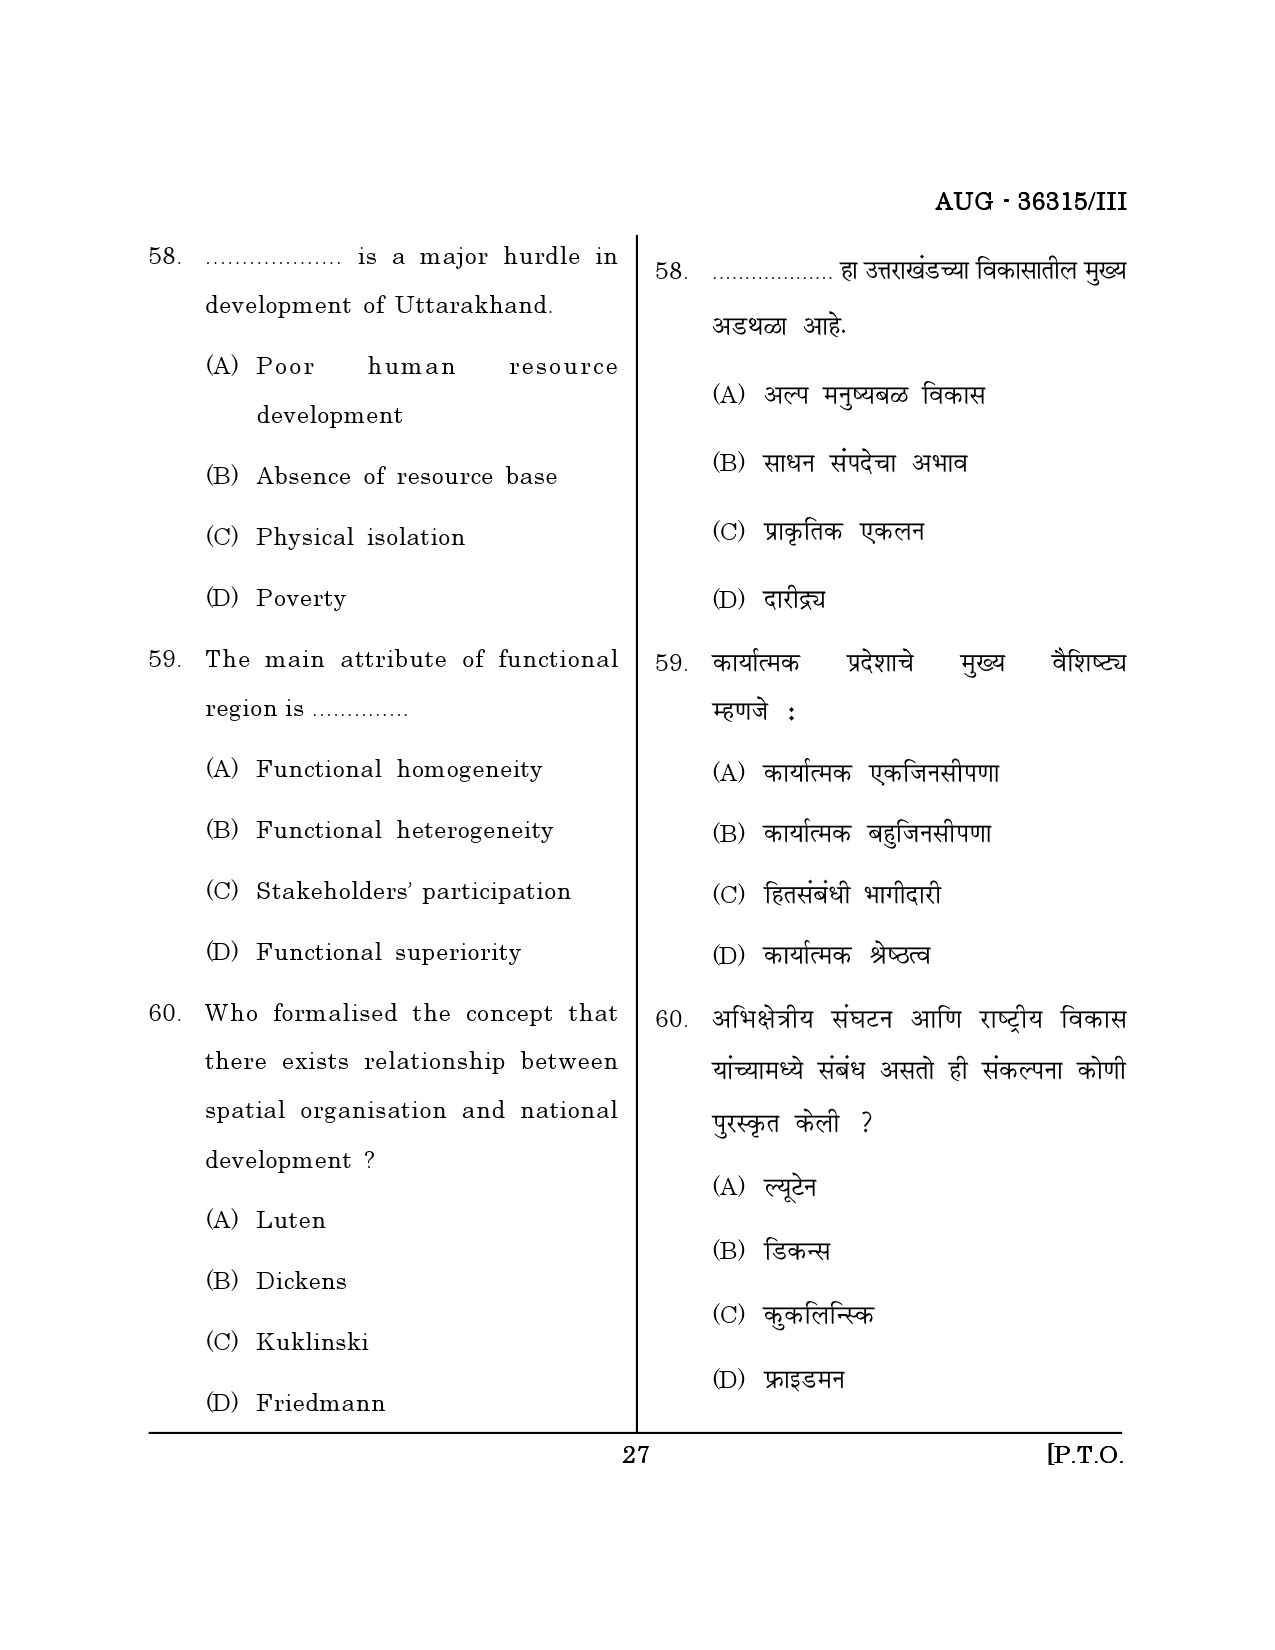 Maharashtra SET Geography Question Paper III August 2015 26